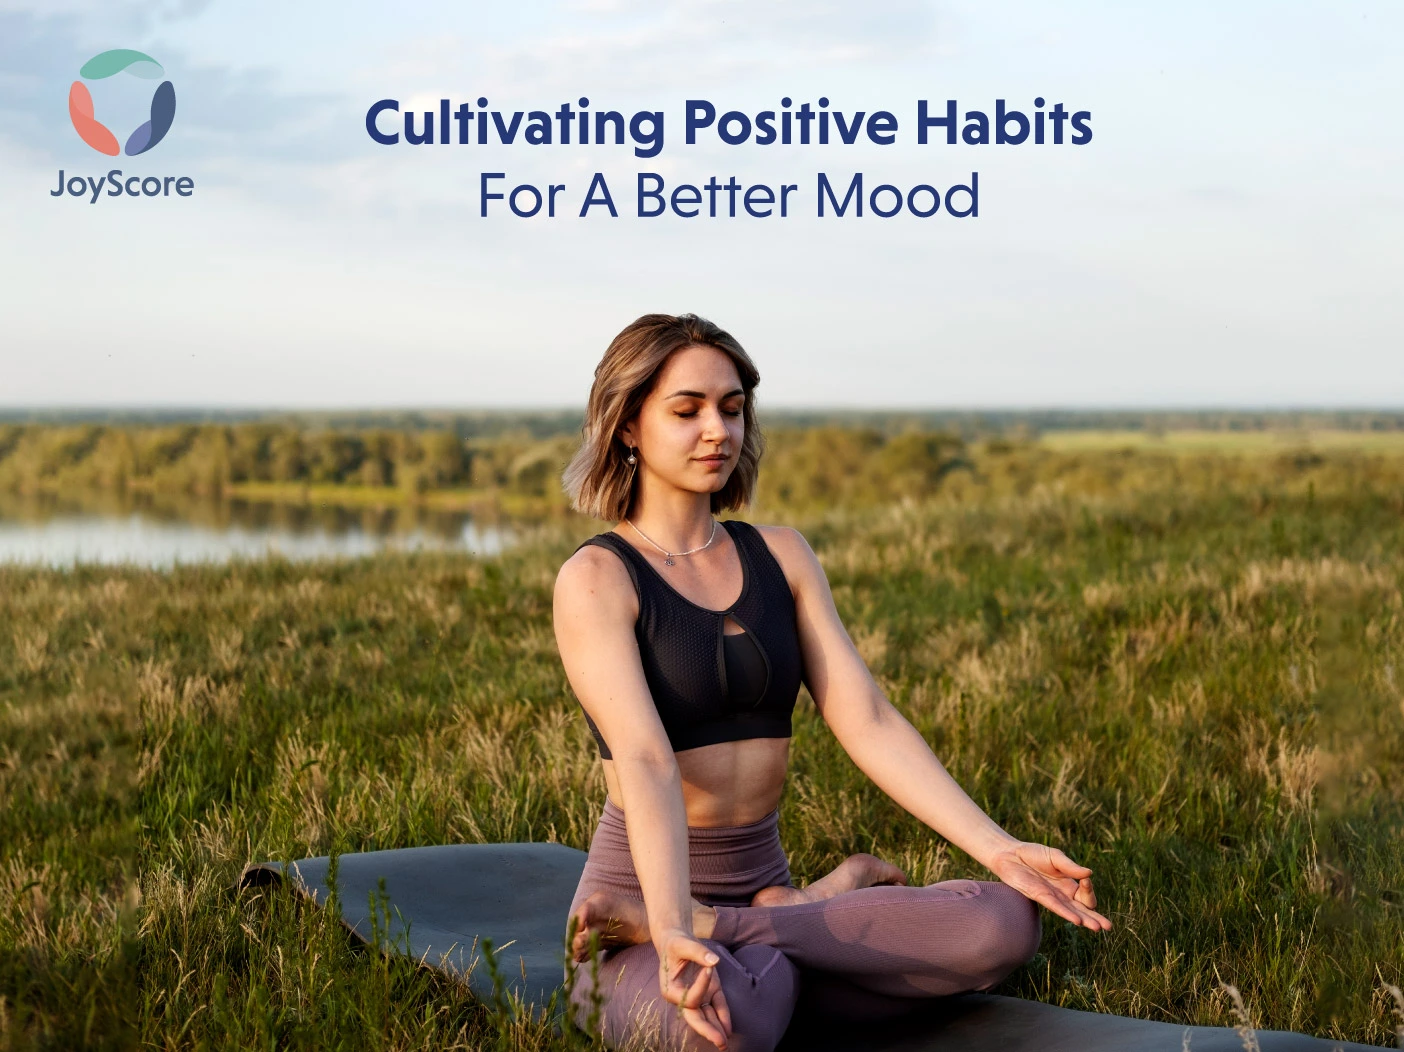 Cultivating Positive Habits for a Better Mood